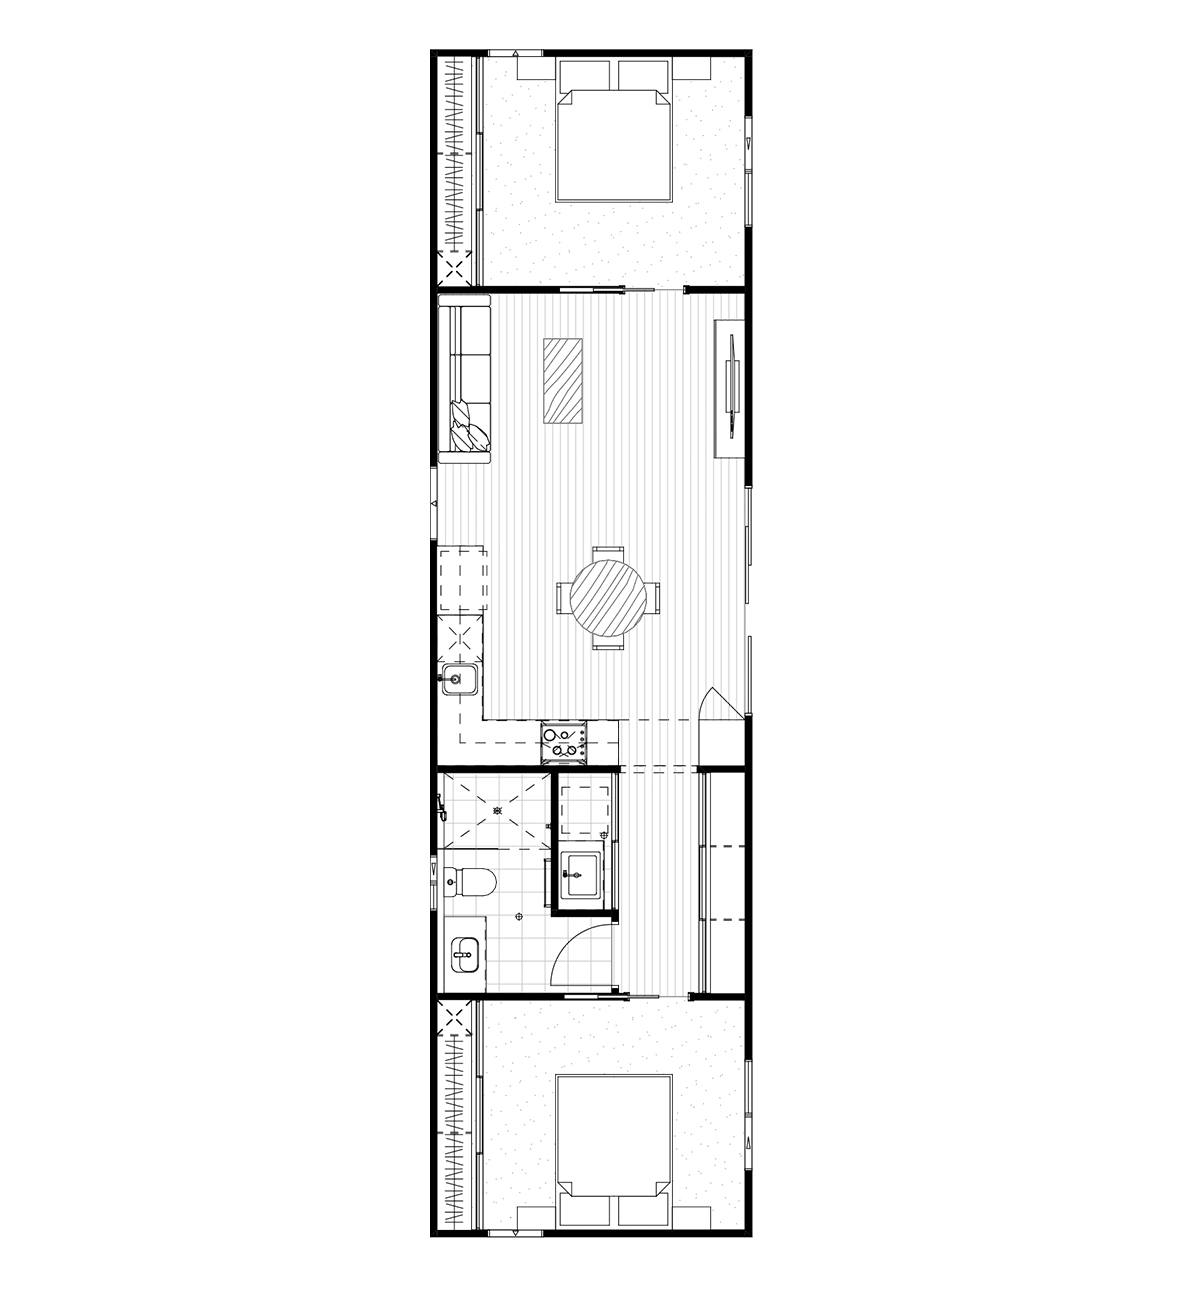 Floor plan for the Fitzroy 2 bedroom prefab home designed by Fox Modular